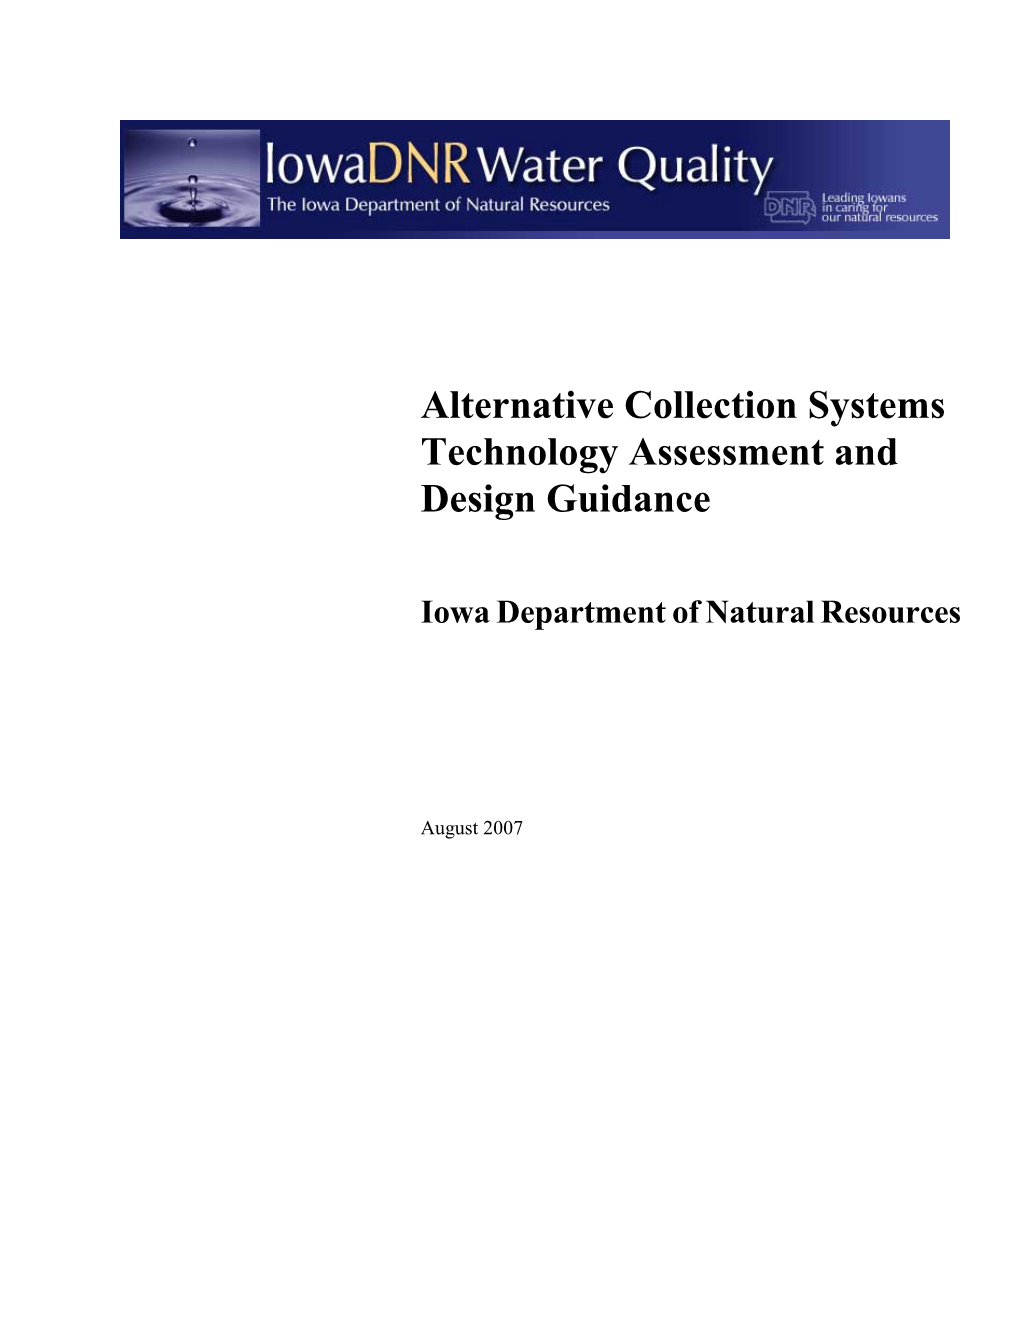 Alternative Collection Systems Technology Assessment and Design Guidance